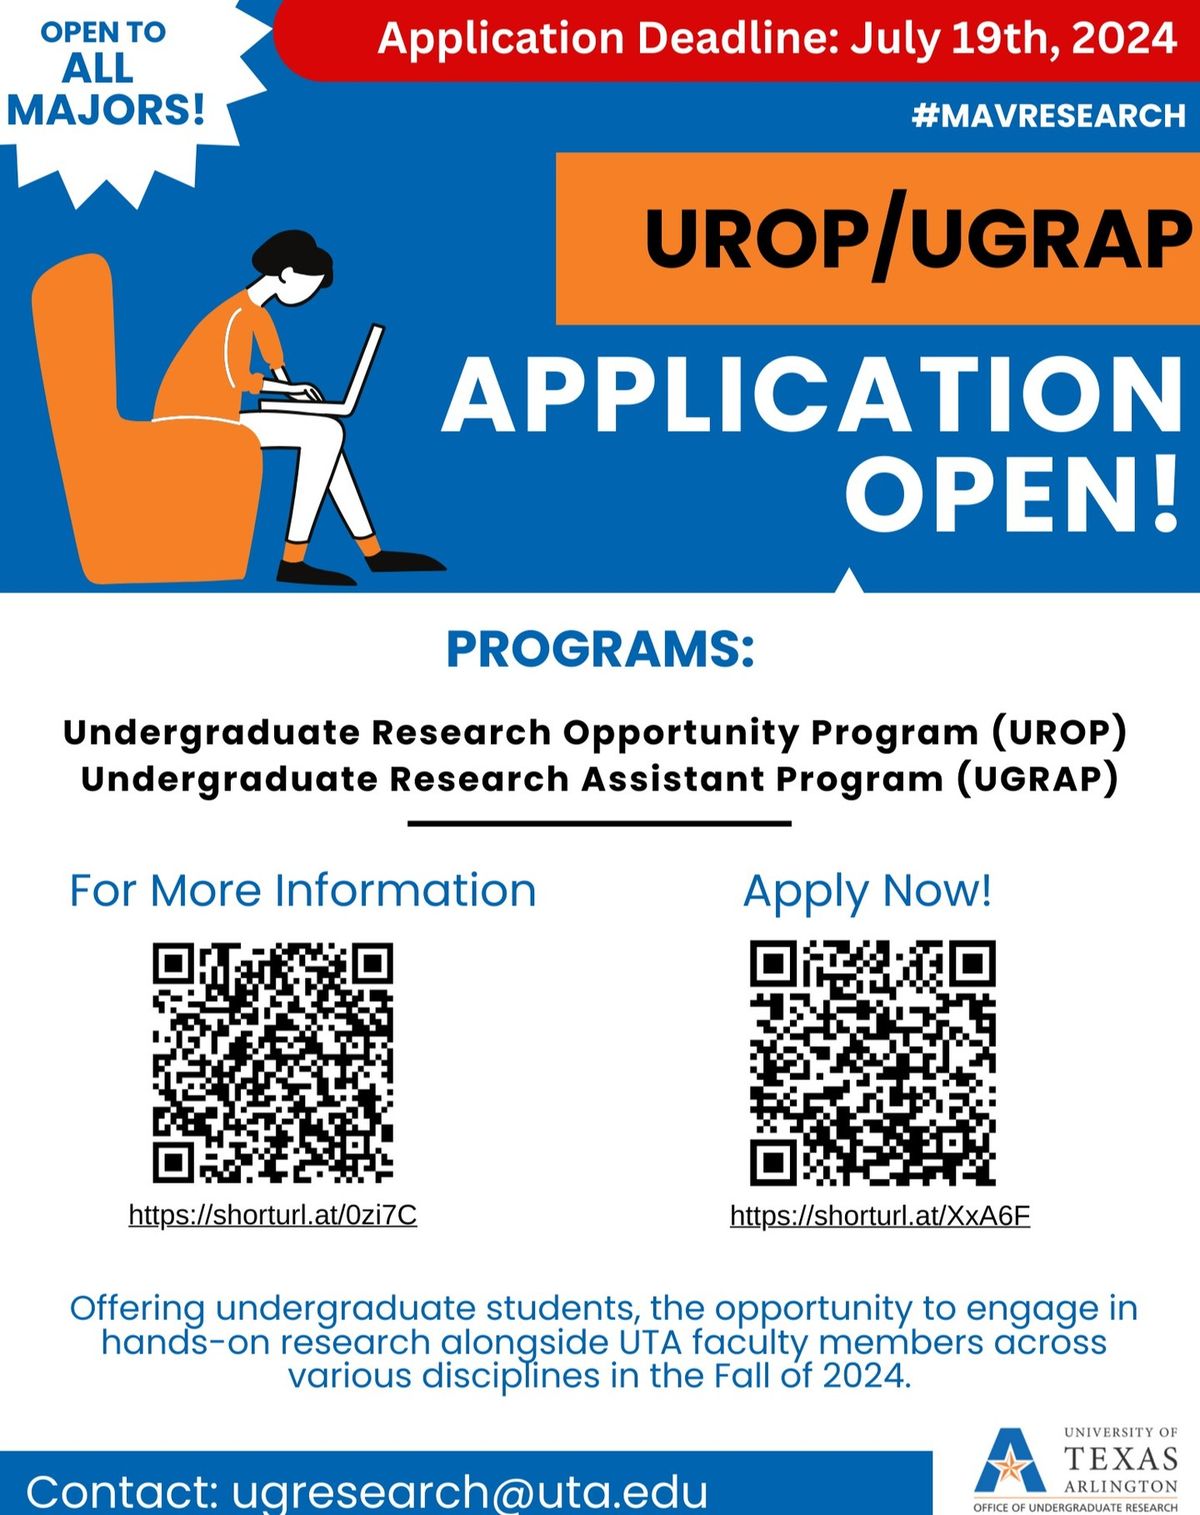 Applications for Undergraduate Research Opportunity Program and Undergraduate Research Assistant Program